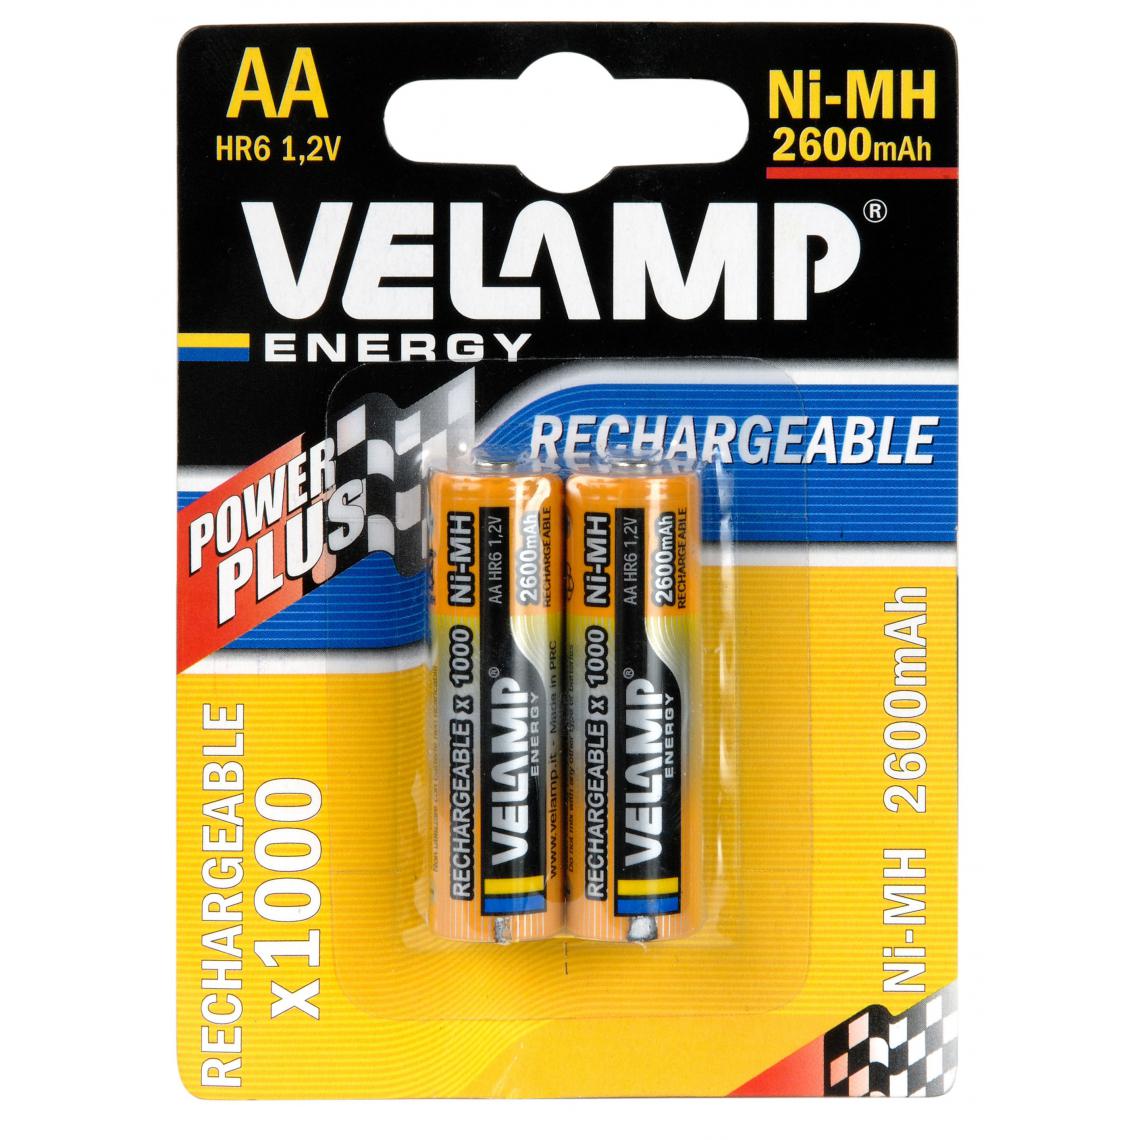 Velamp - 2 piles rechargeables NI-MH AA 2600 mAh - Piles rechargeables